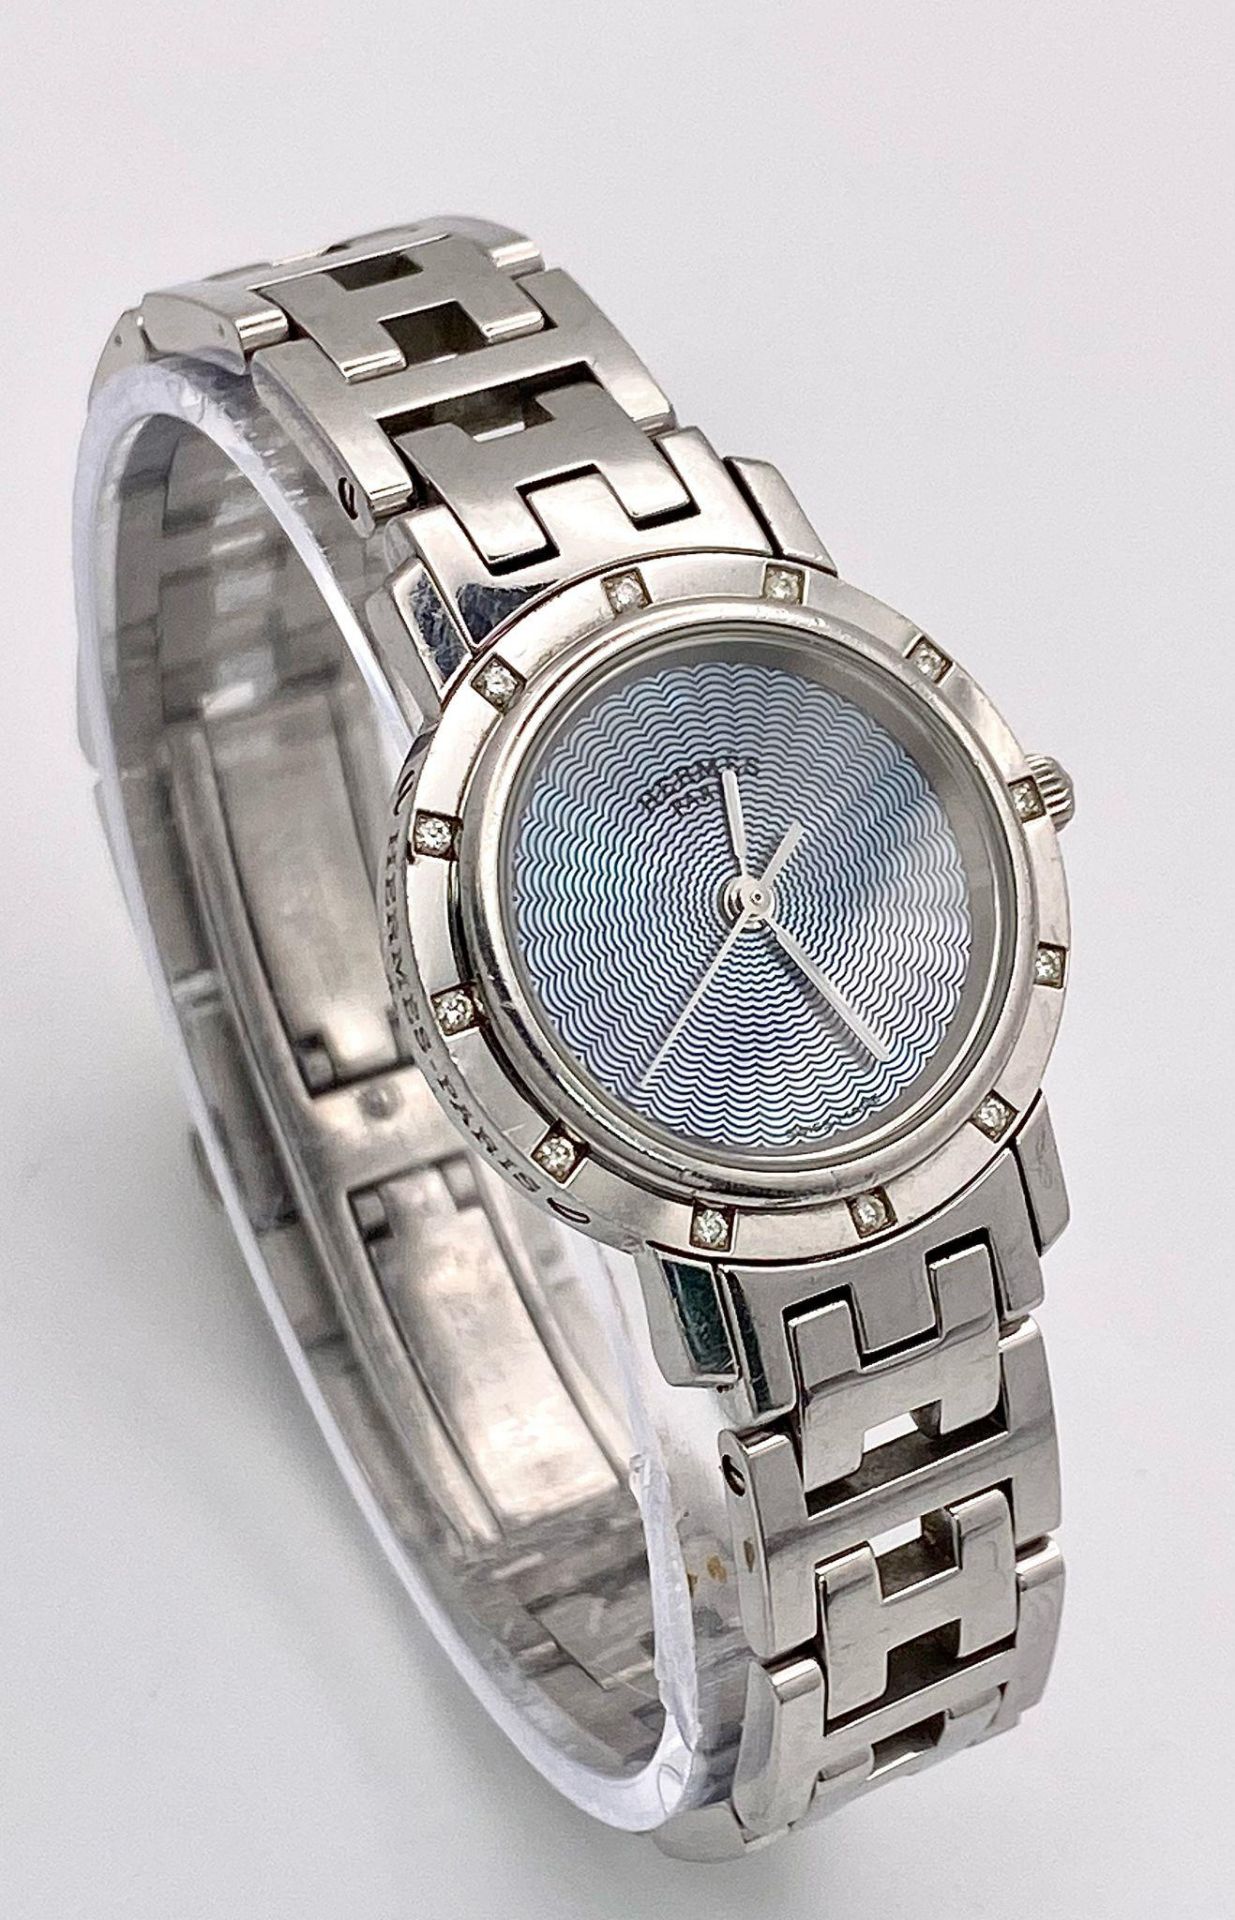 A "HERMES" STAINLESS STEEL LADIES QUARTZ WATCH WITH DIAMOND OUTER BEZEL. 24mm